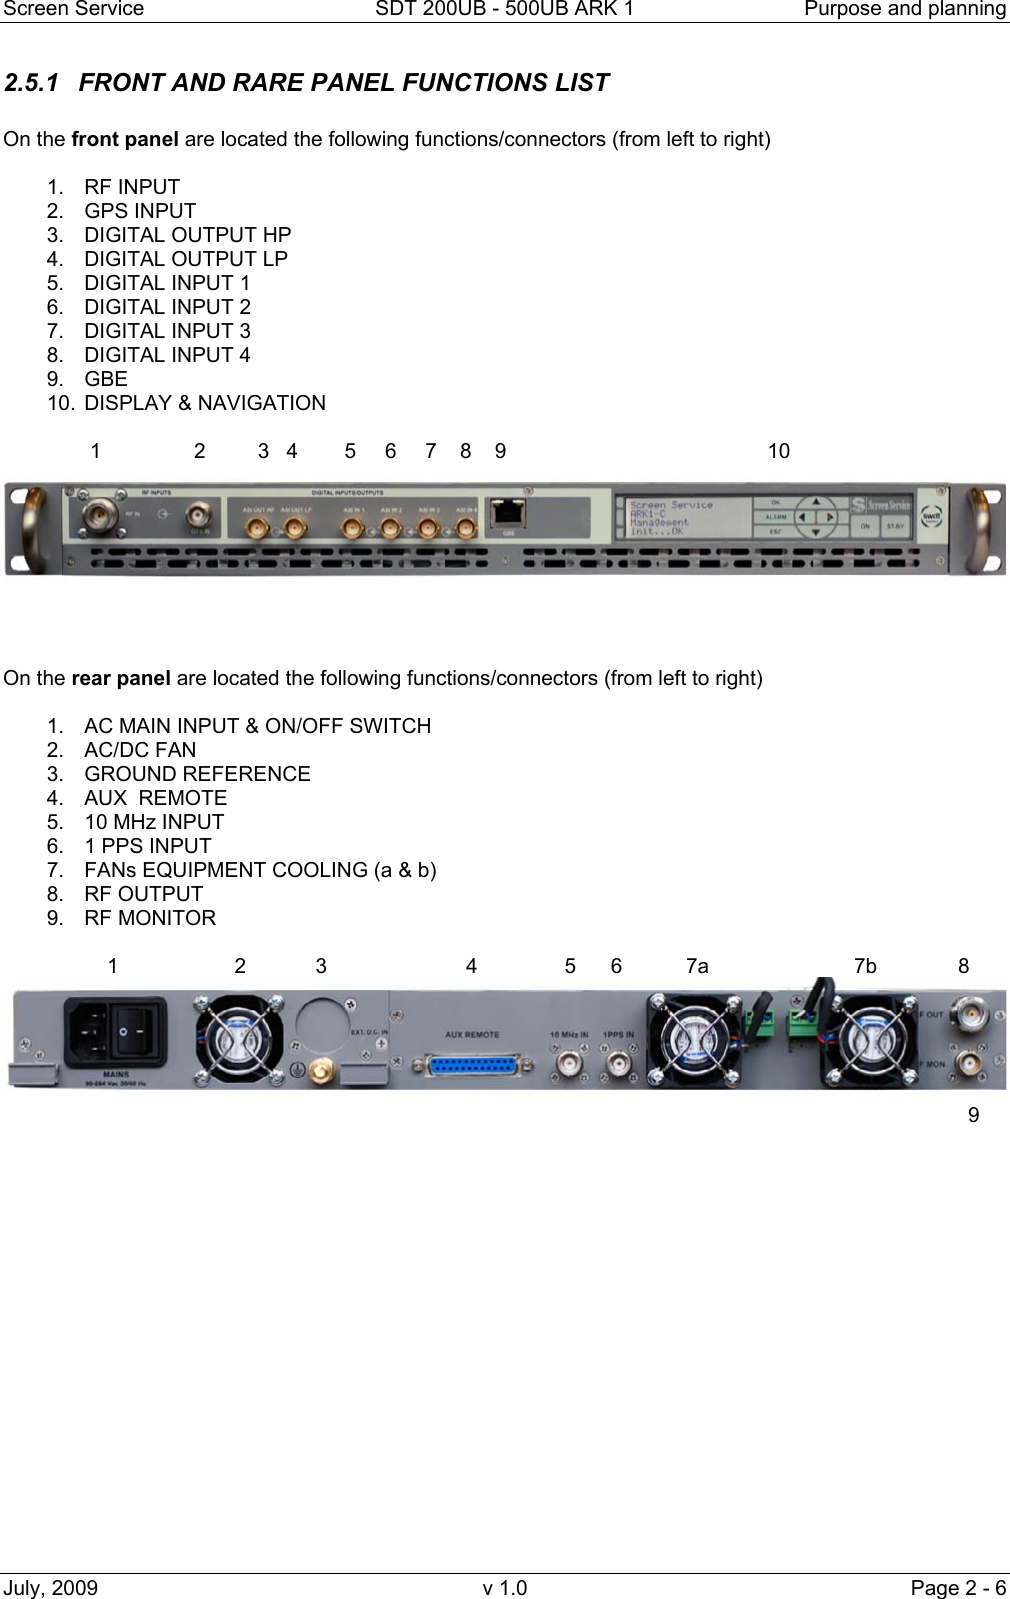 Screen Service  SDT 200UB - 500UB ARK 1  Purpose and planning July, 2009  v 1.0  Page 2 - 6 2.5.1  FRONT AND RARE PANEL FUNCTIONS LIST  On the front panel are located the following functions/connectors (from left to right)  1. RF INPUT 2. GPS INPUT 3.  DIGITAL OUTPUT HP 4.  DIGITAL OUTPUT LP 5.  DIGITAL INPUT 1 6.  DIGITAL INPUT 2 7.  DIGITAL INPUT 3 8.  DIGITAL INPUT 4  9. GBE  10. DISPLAY &amp; NAVIGATION                 1                2         3   4        5     6     7    8    9                                             10     On the rear panel are located the following functions/connectors (from left to right)  1.  AC MAIN INPUT &amp; ON/OFF SWITCH 2. AC/DC FAN 3. GROUND REFERENCE 4.  AUX  REMOTE   5.  10 MHz INPUT 6.  1 PPS INPUT 7.  FANs EQUIPMENT COOLING (a &amp; b)  8. RF OUTPUT  9.  RF MONITOR                     1                    2            3                        4               5      6           7a                         7b              8                                                                                                                                                                    9                 